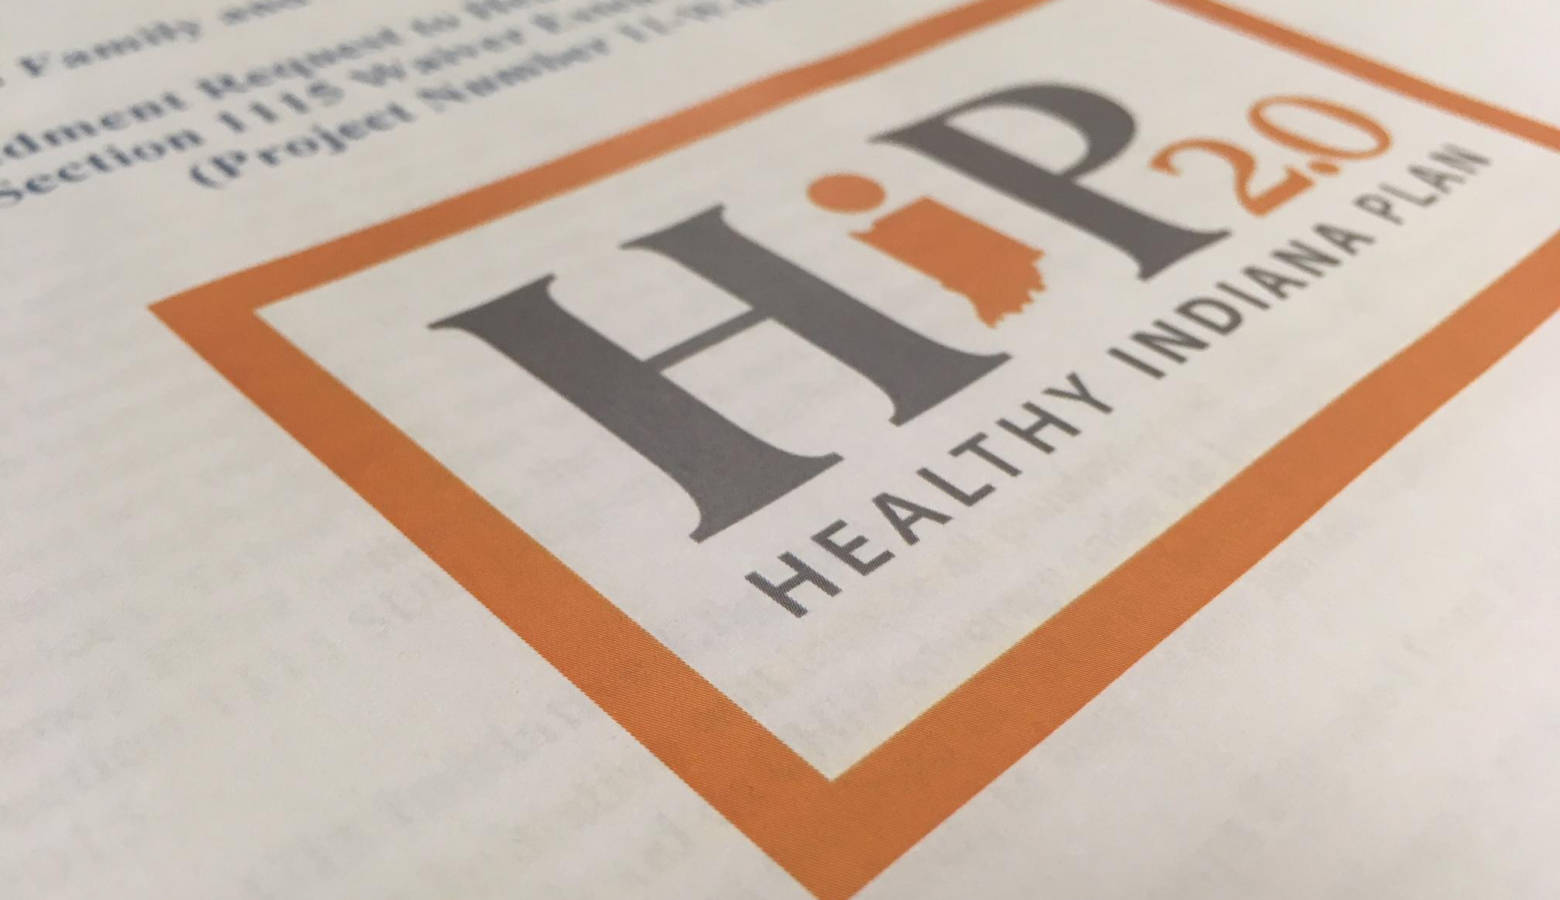 An estimated 70,000 to 80,000 on HIP, Indiana’s Medicaid expansion program, may have to comply with work requirements if they don’t meet certain exemptions. (FILE PHOTO: Sarah Fentem/Side Effects Public Media)